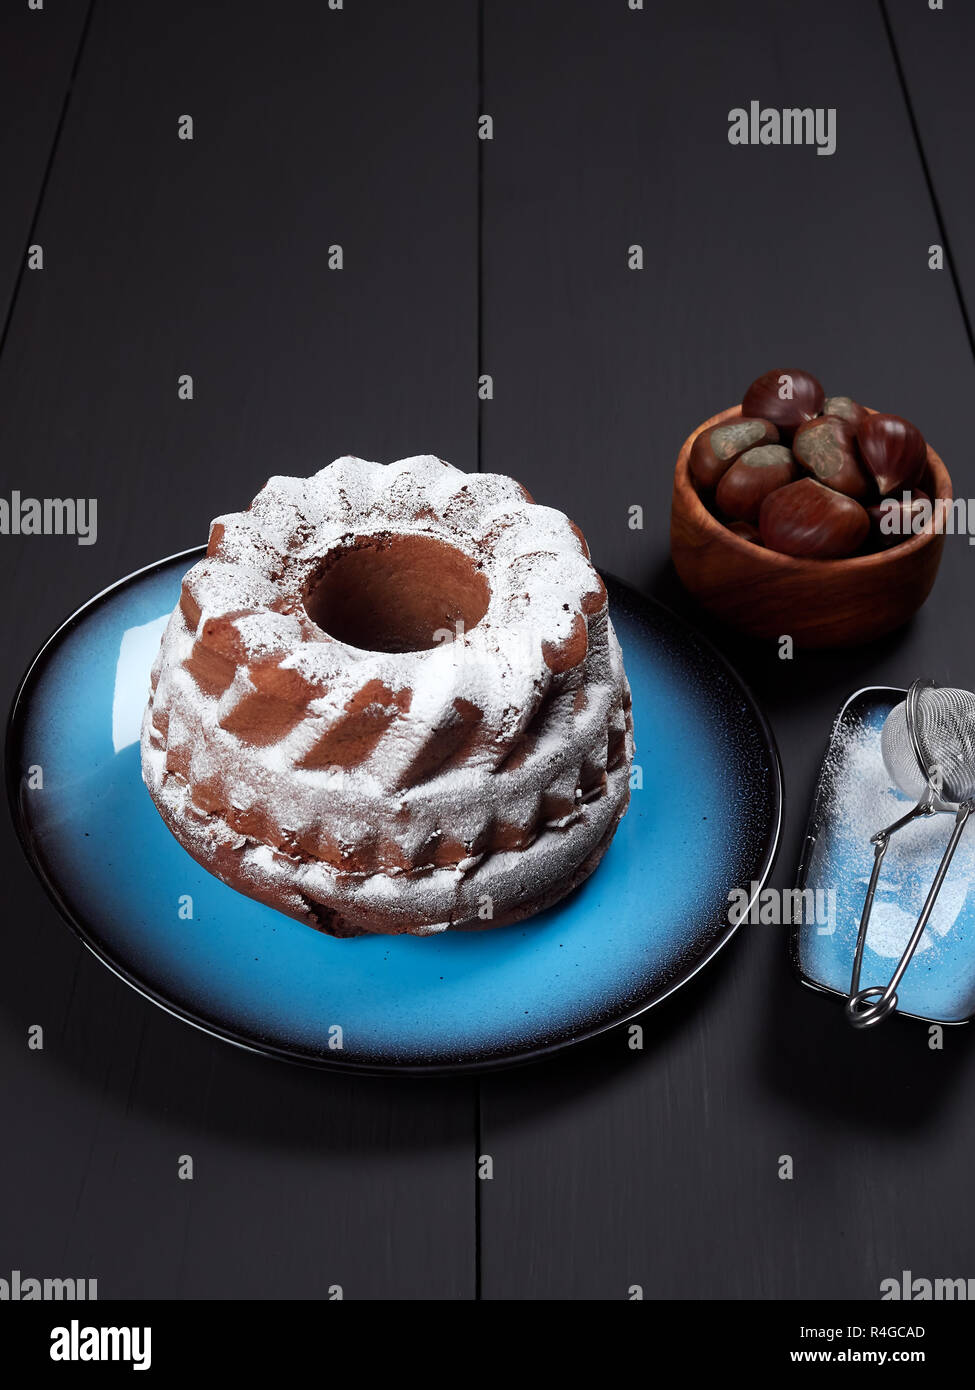 Delicious Chestnut Bundt Cake Using Sweetened Chestnut Puree And Chocolate Chips Dusted With Sugar Set On A Blue Plate On A Dark Brown Background Stock Photo 226554341 Alamy,How To Make A Tequila Sunrise Video